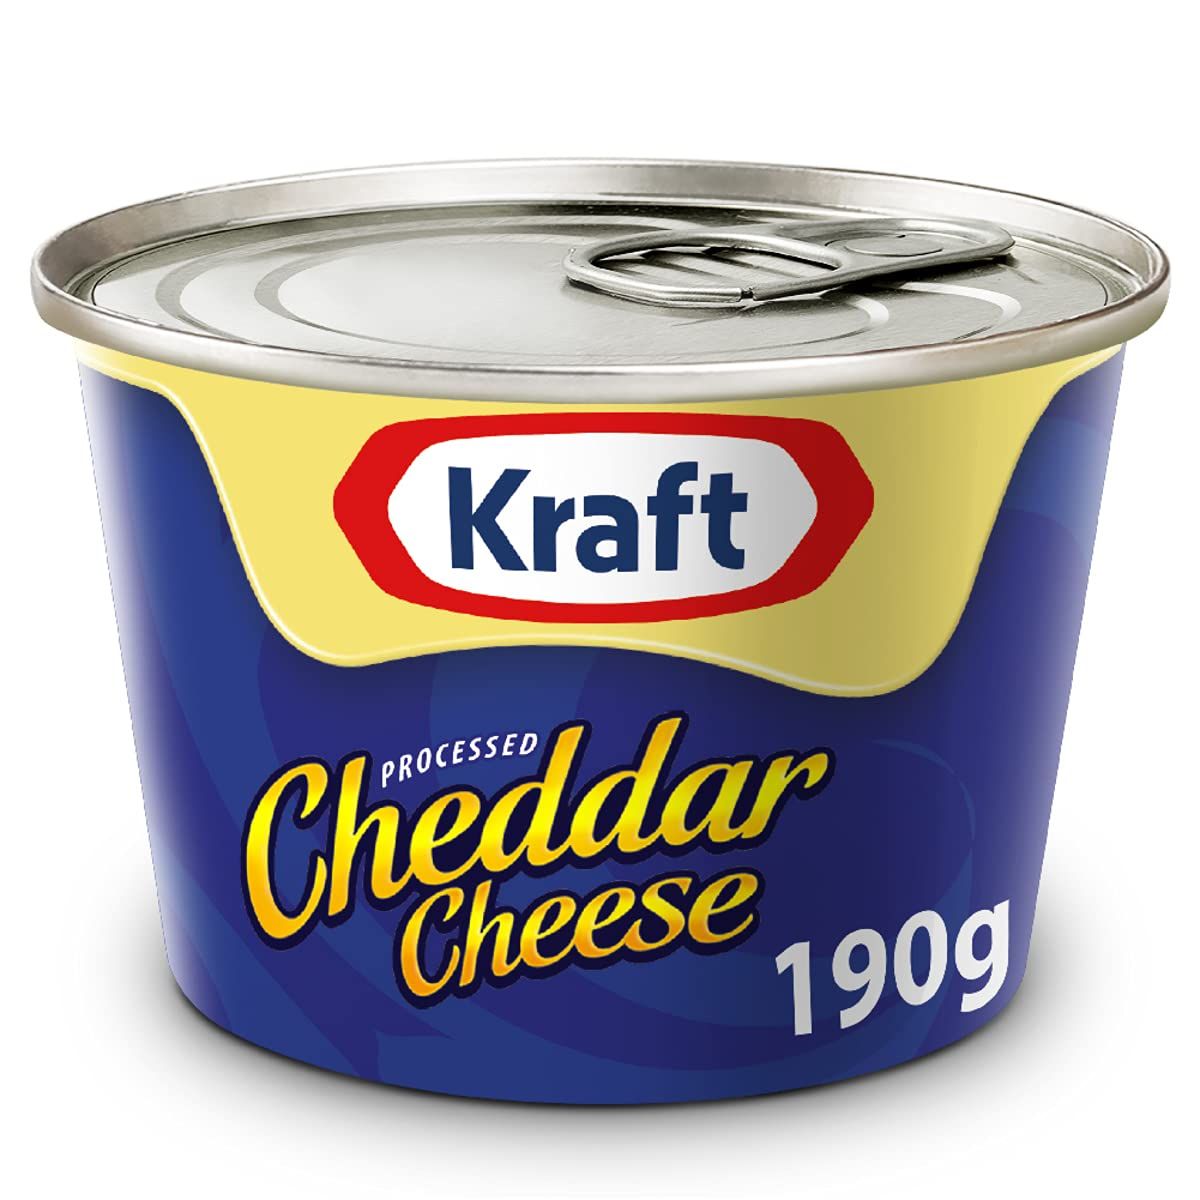 Kraft Processed Cheddar Cheese Image